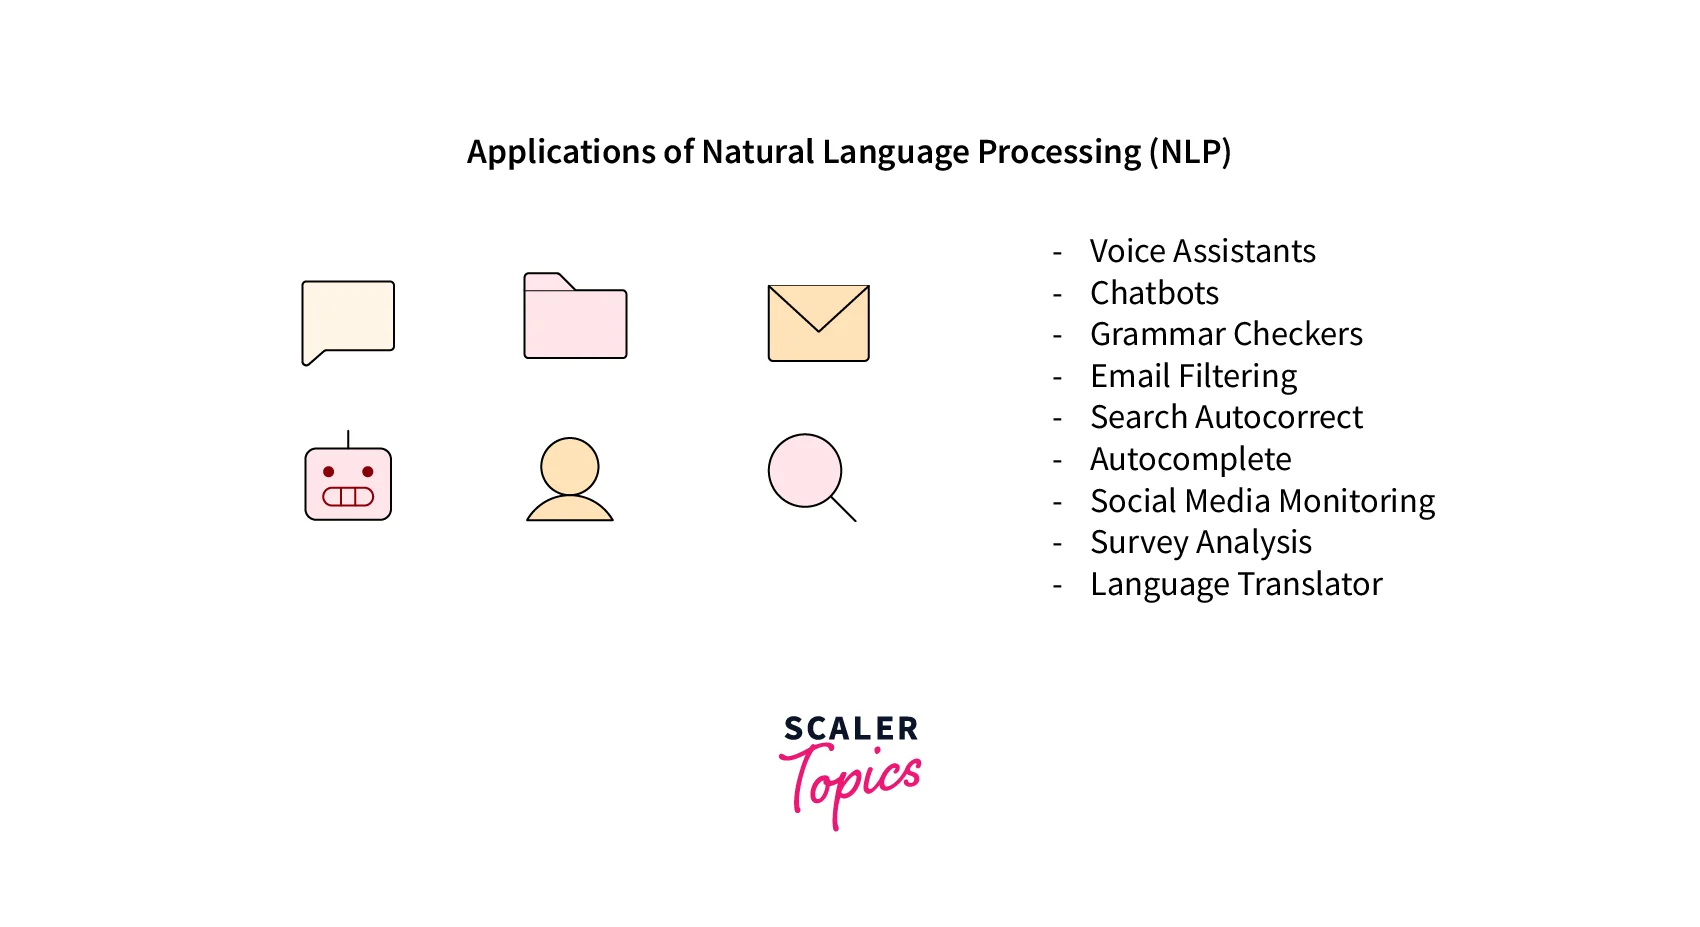 Application of NLP